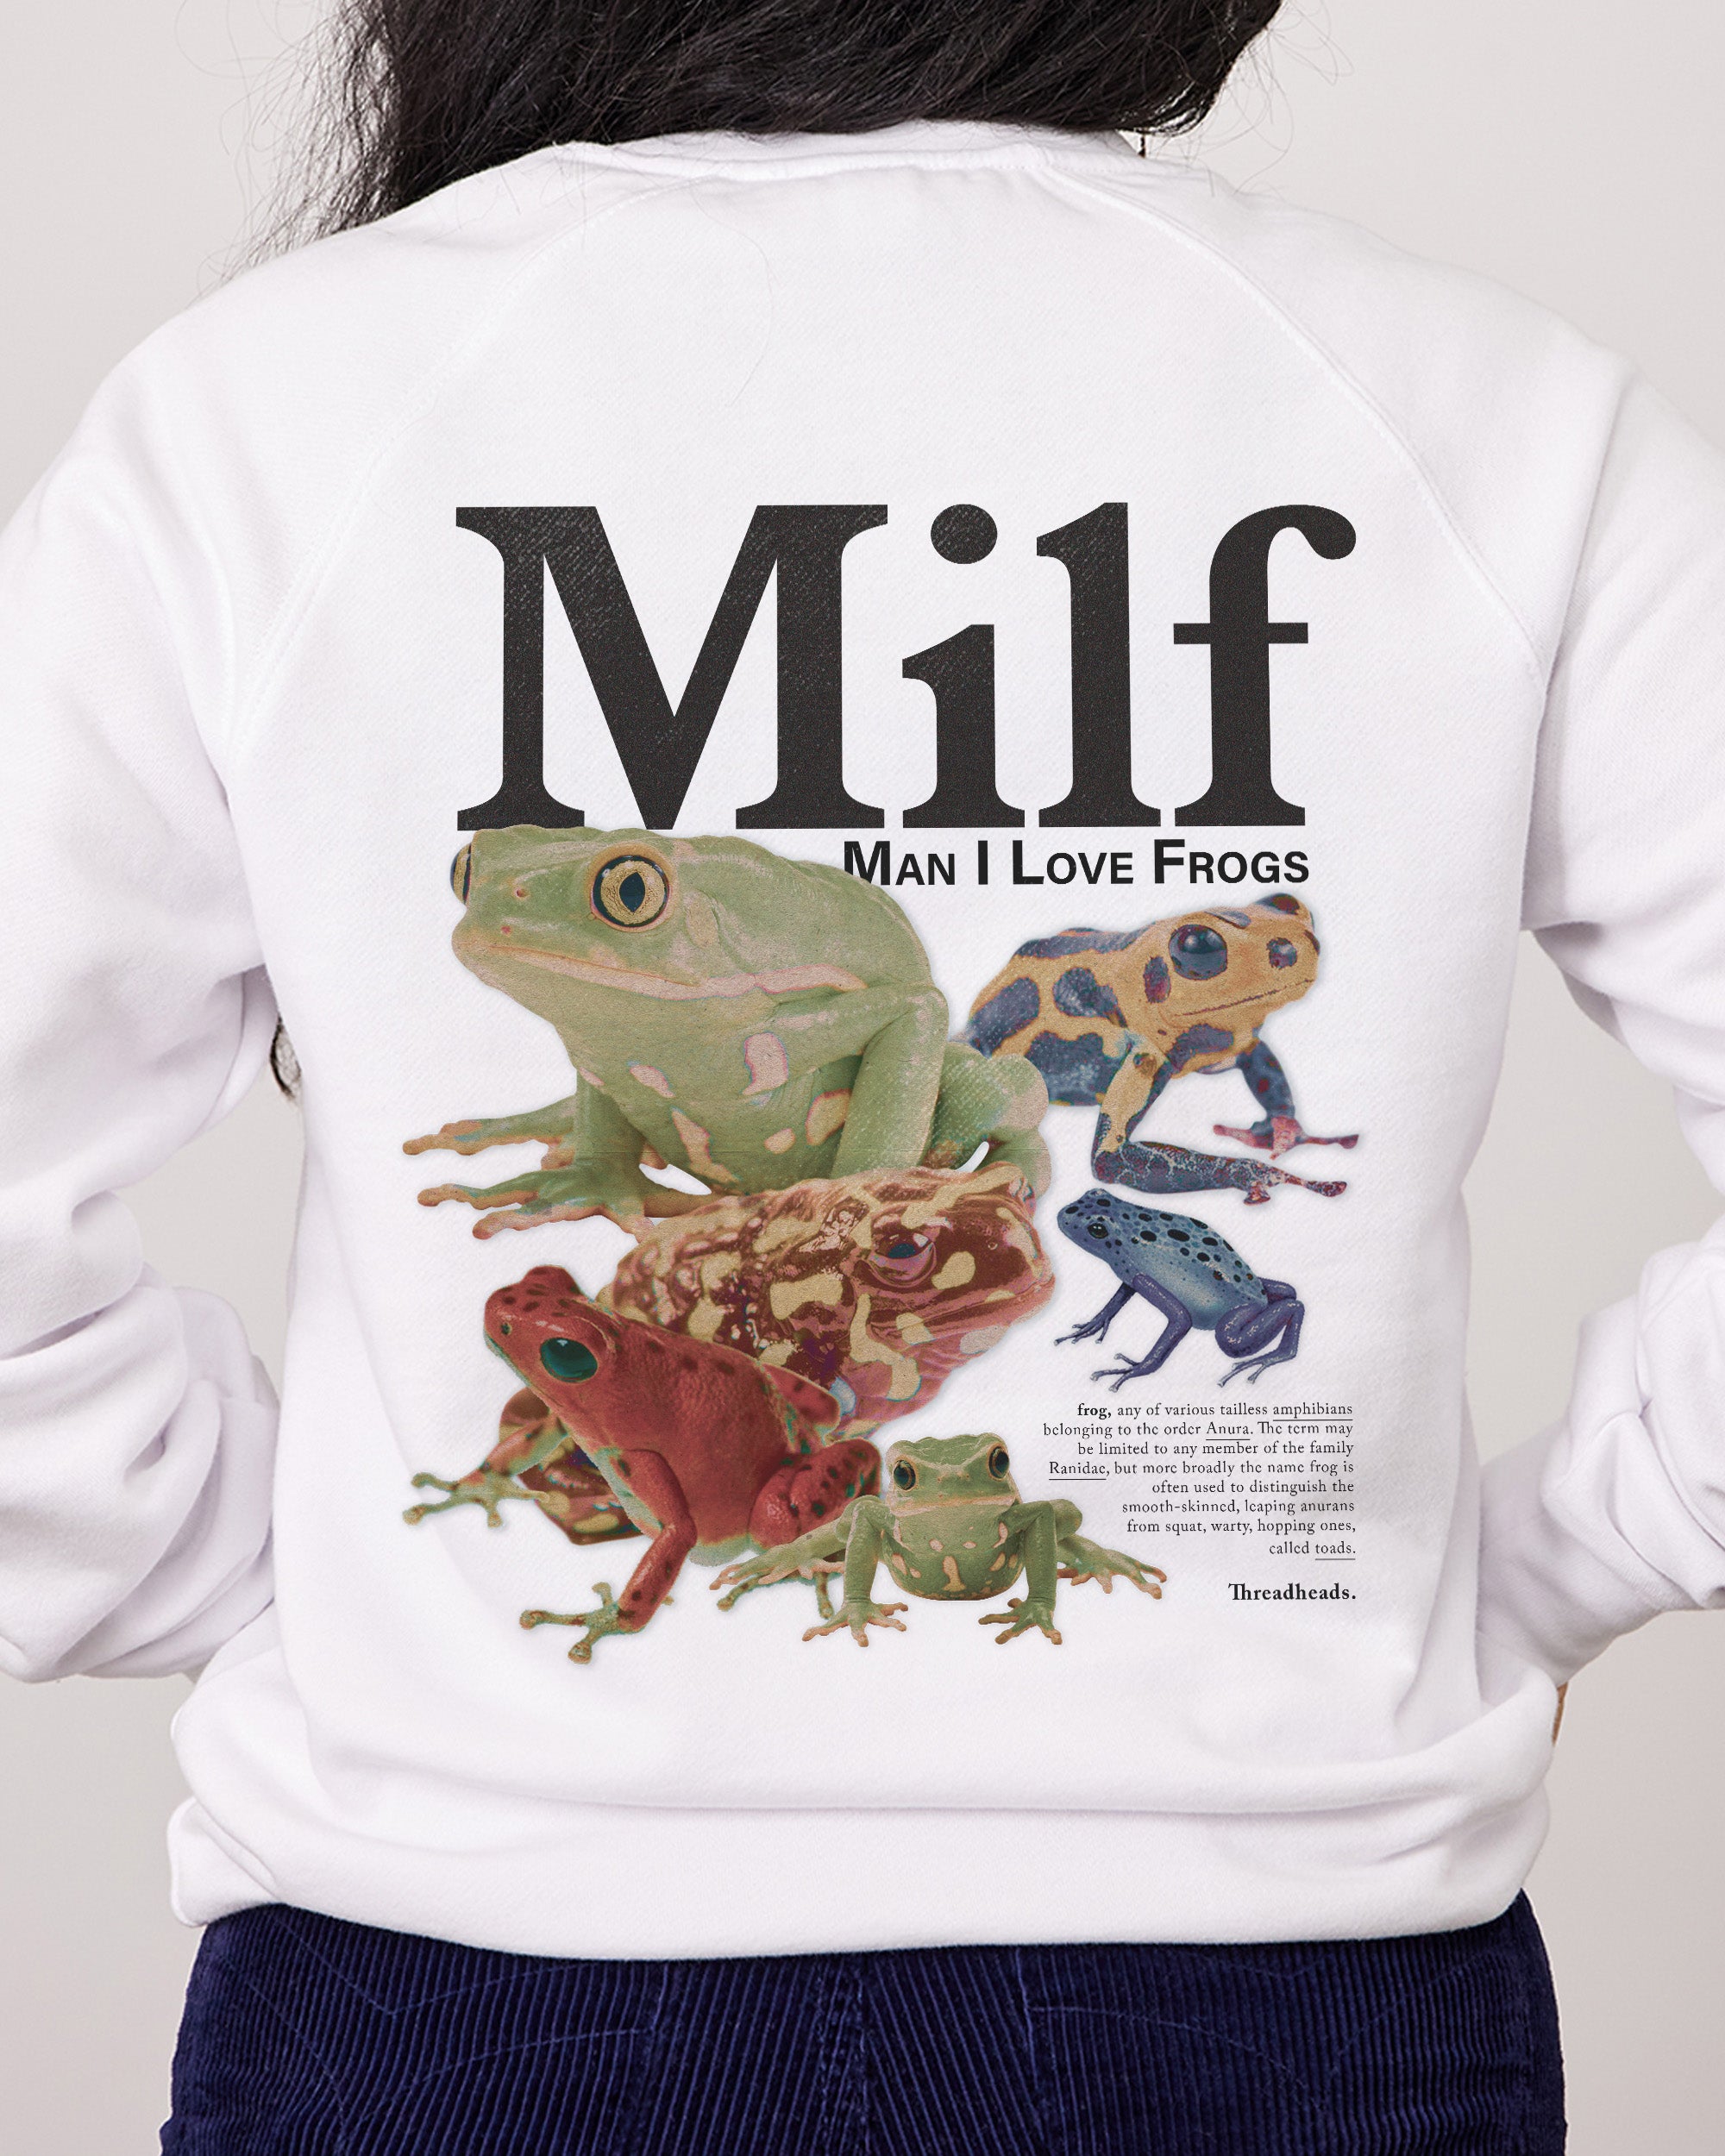 Man I Love Frogs Front and Back Jumper